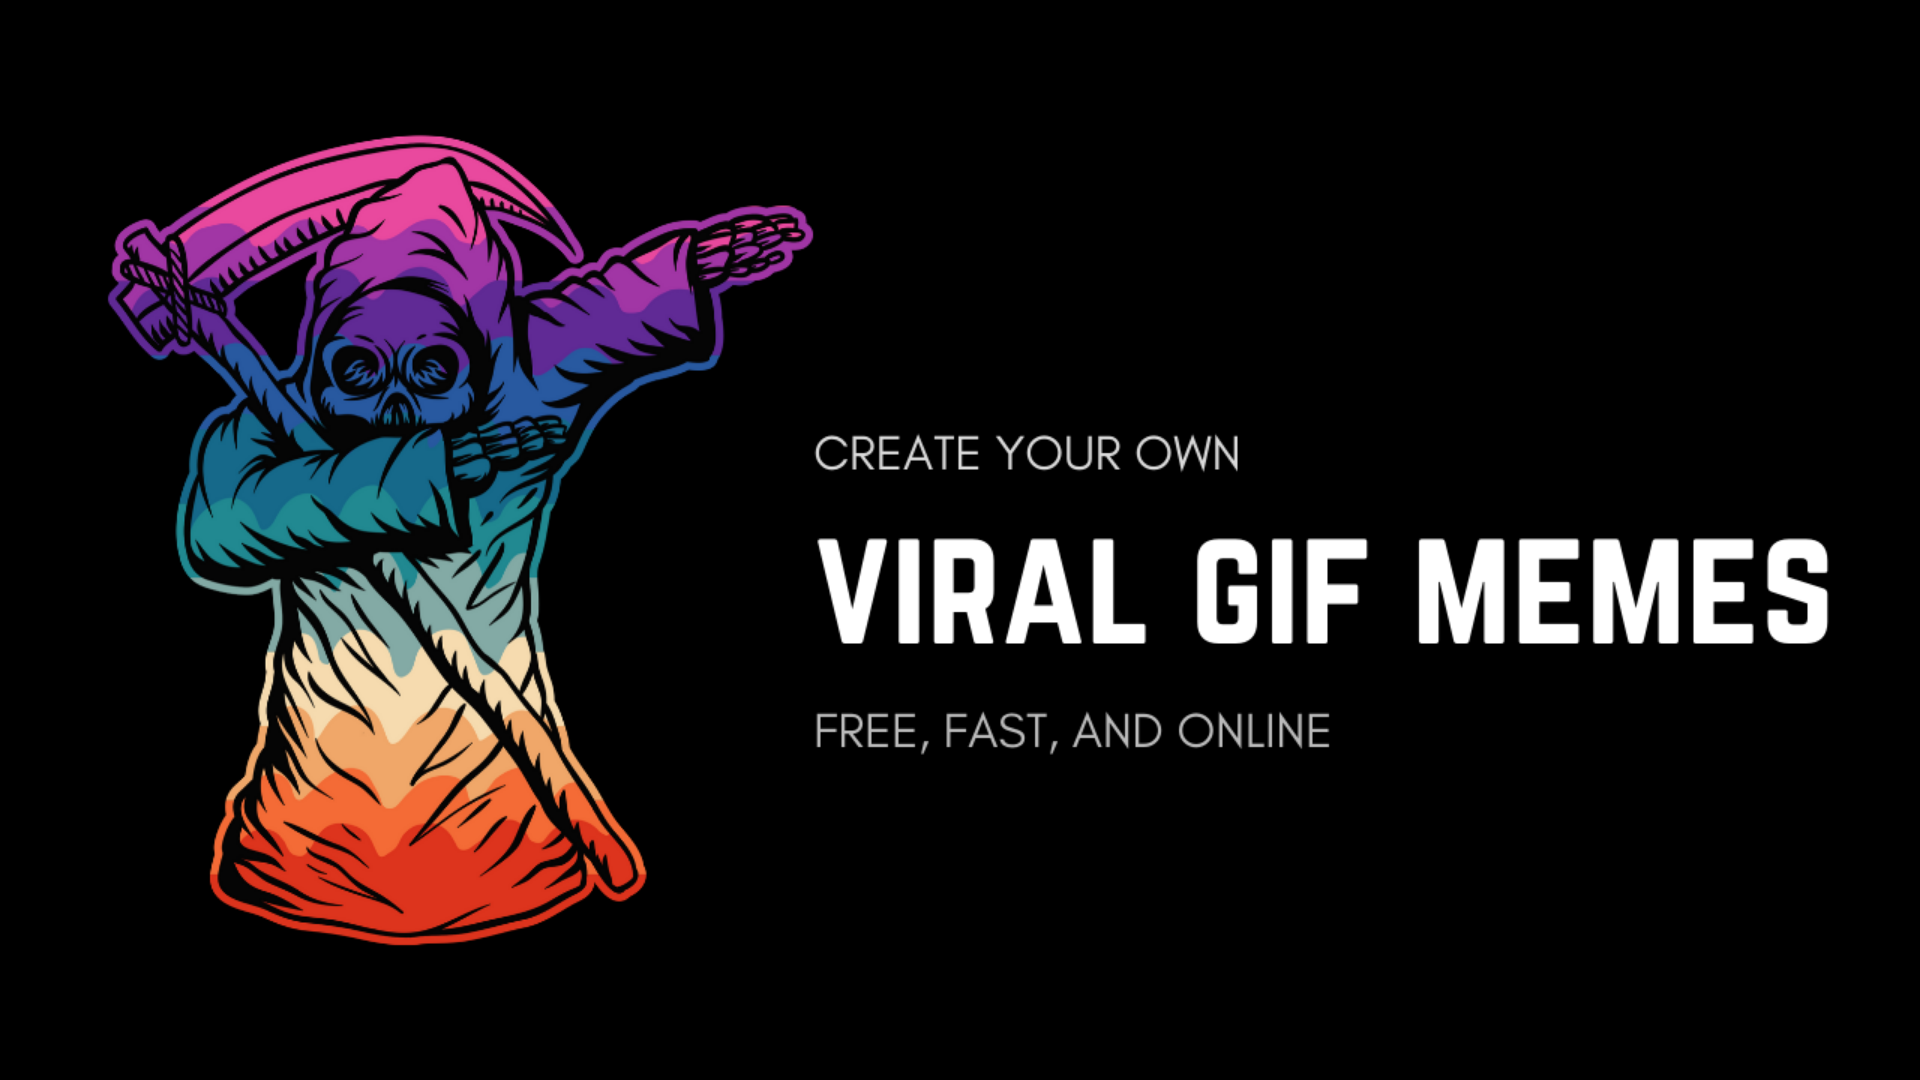 1 GIF Meme Maker - Create and share memes for free!